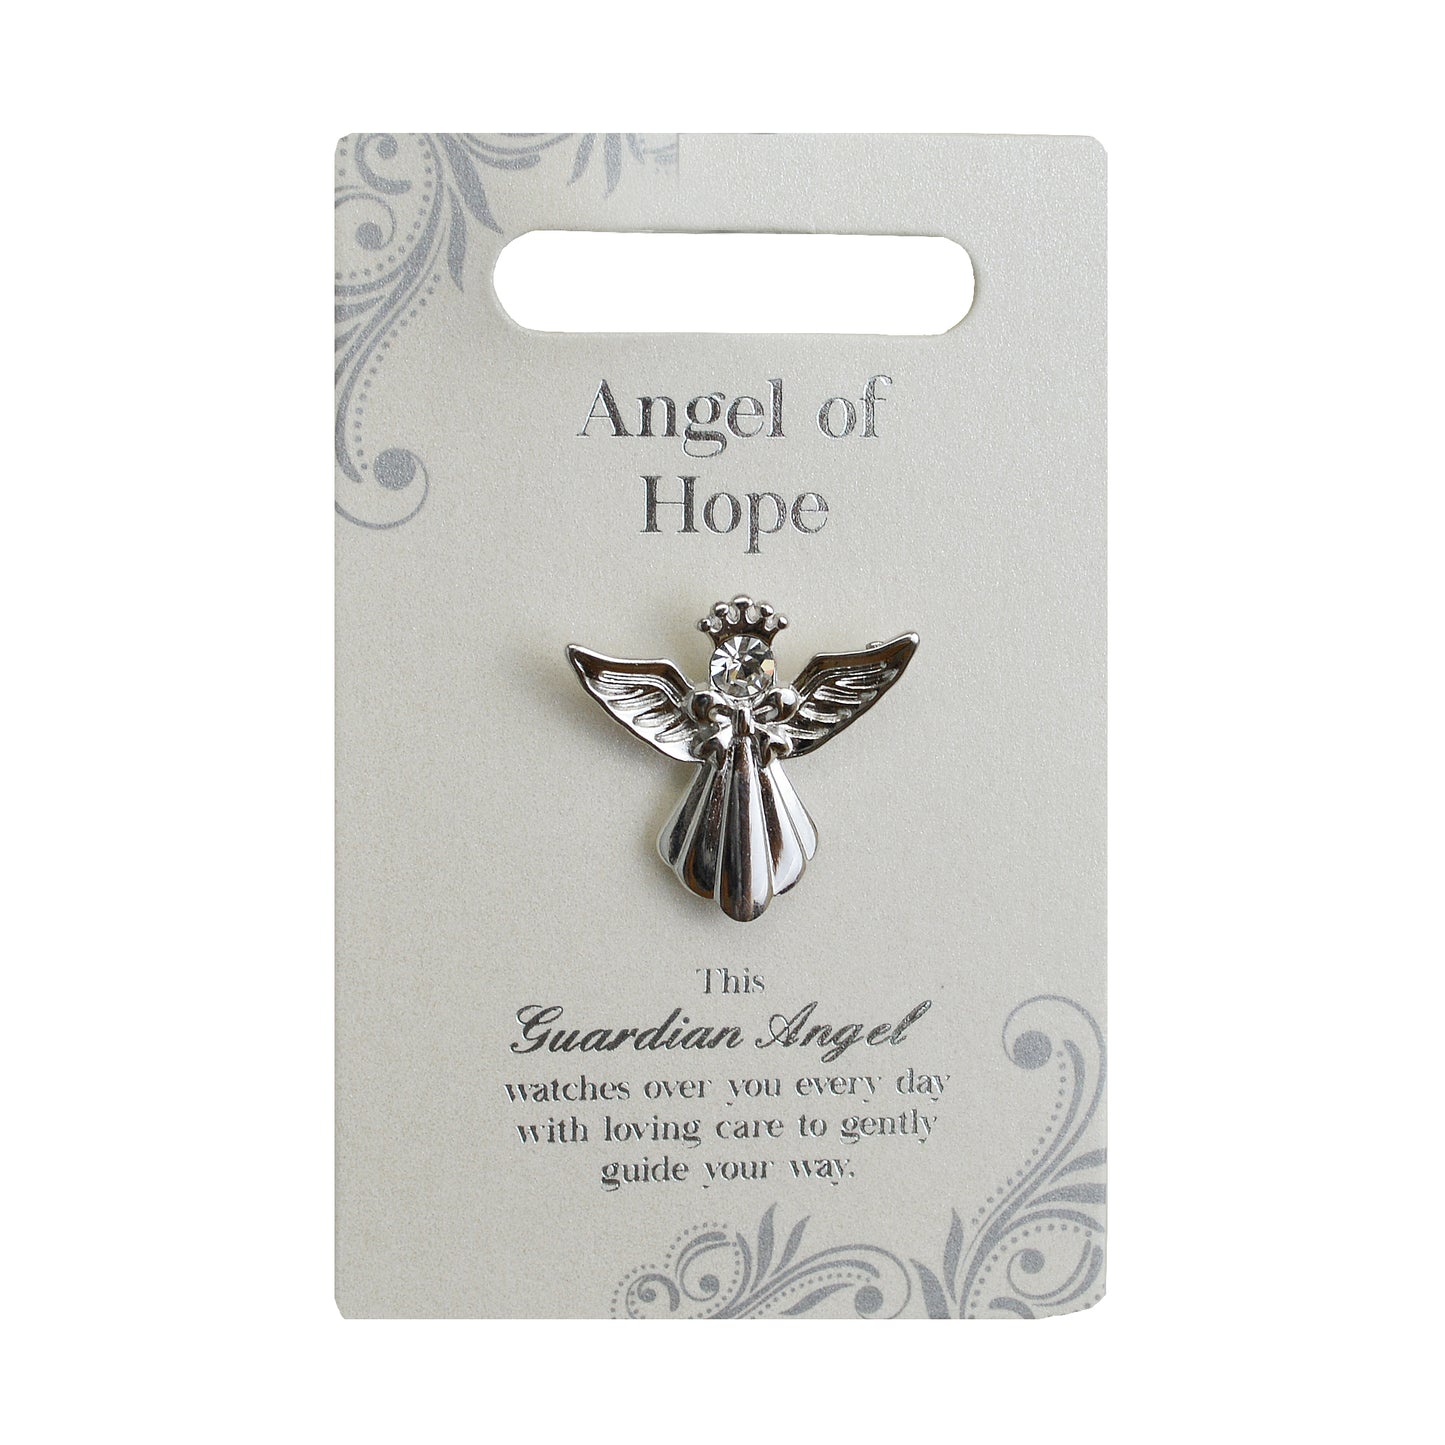 Angel Of Hope Silver Coloured Angel Pin With Gem Stone